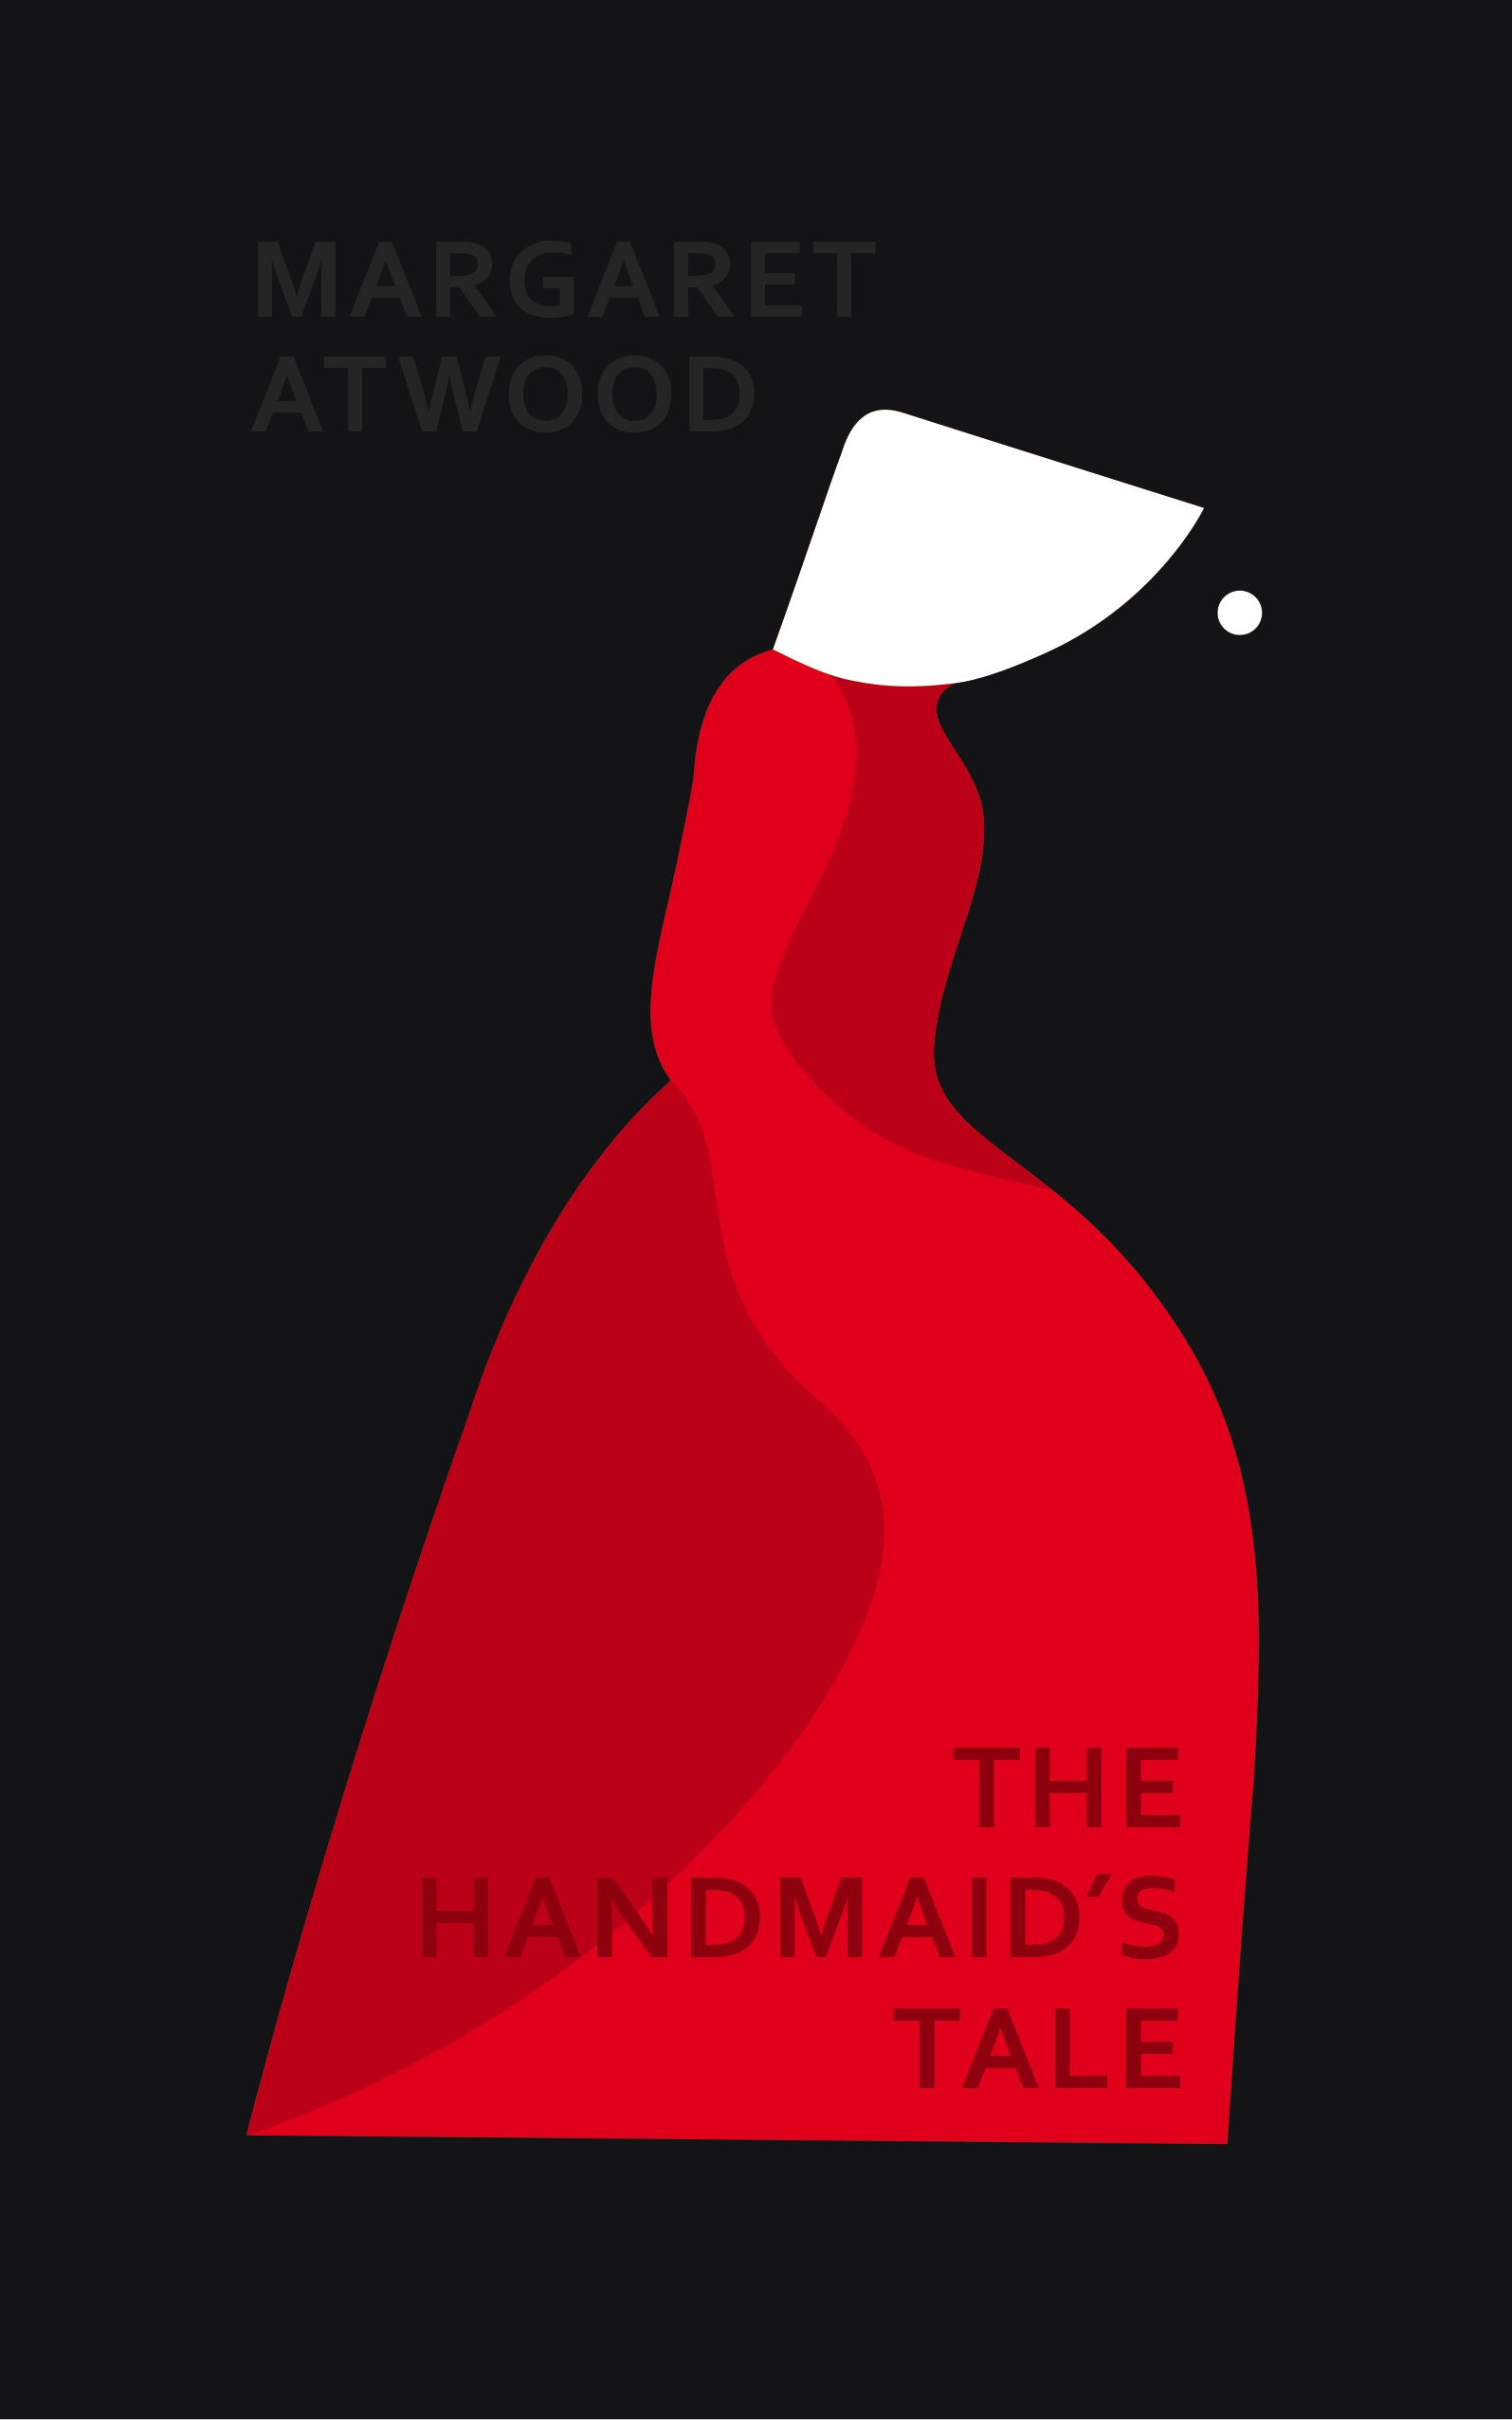 Extract | The Handmaid's Tale by Margaret Atwood - Penguin Books Australia